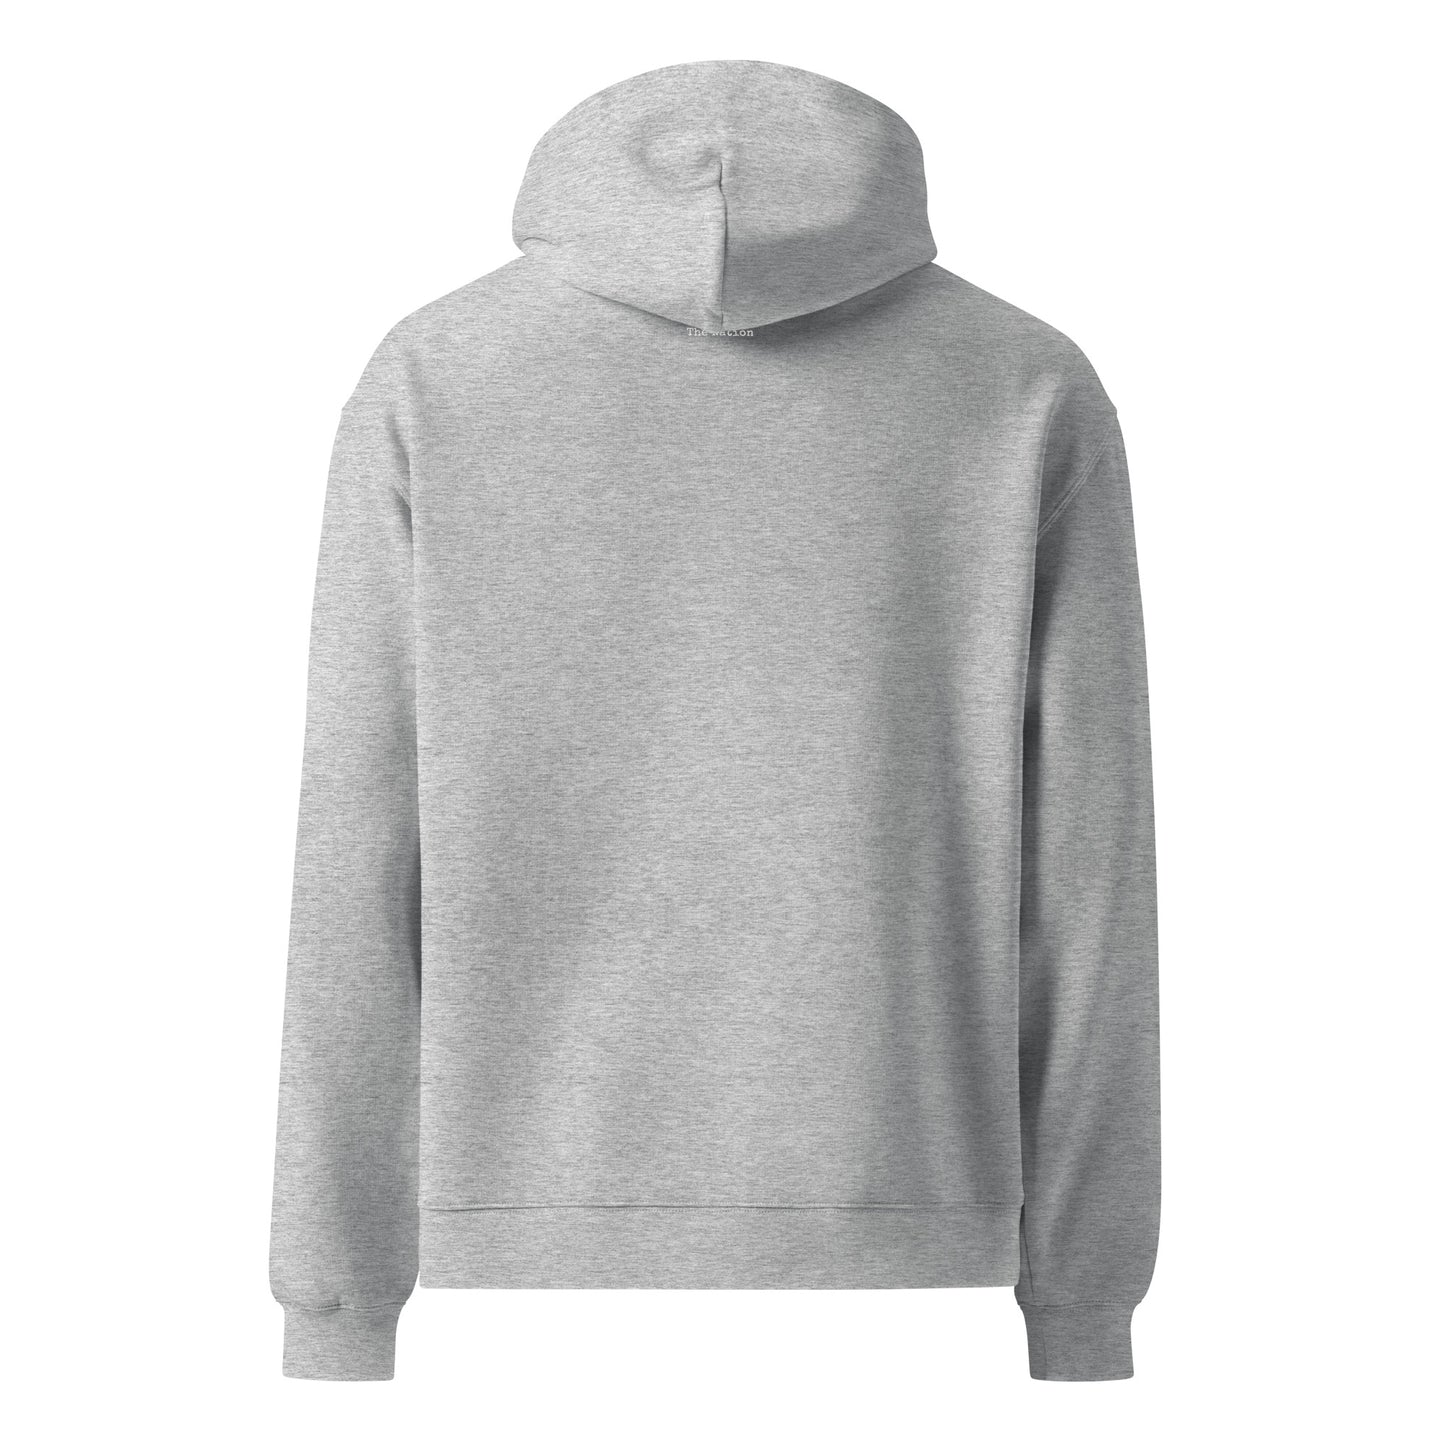 Nation oversized hoodie